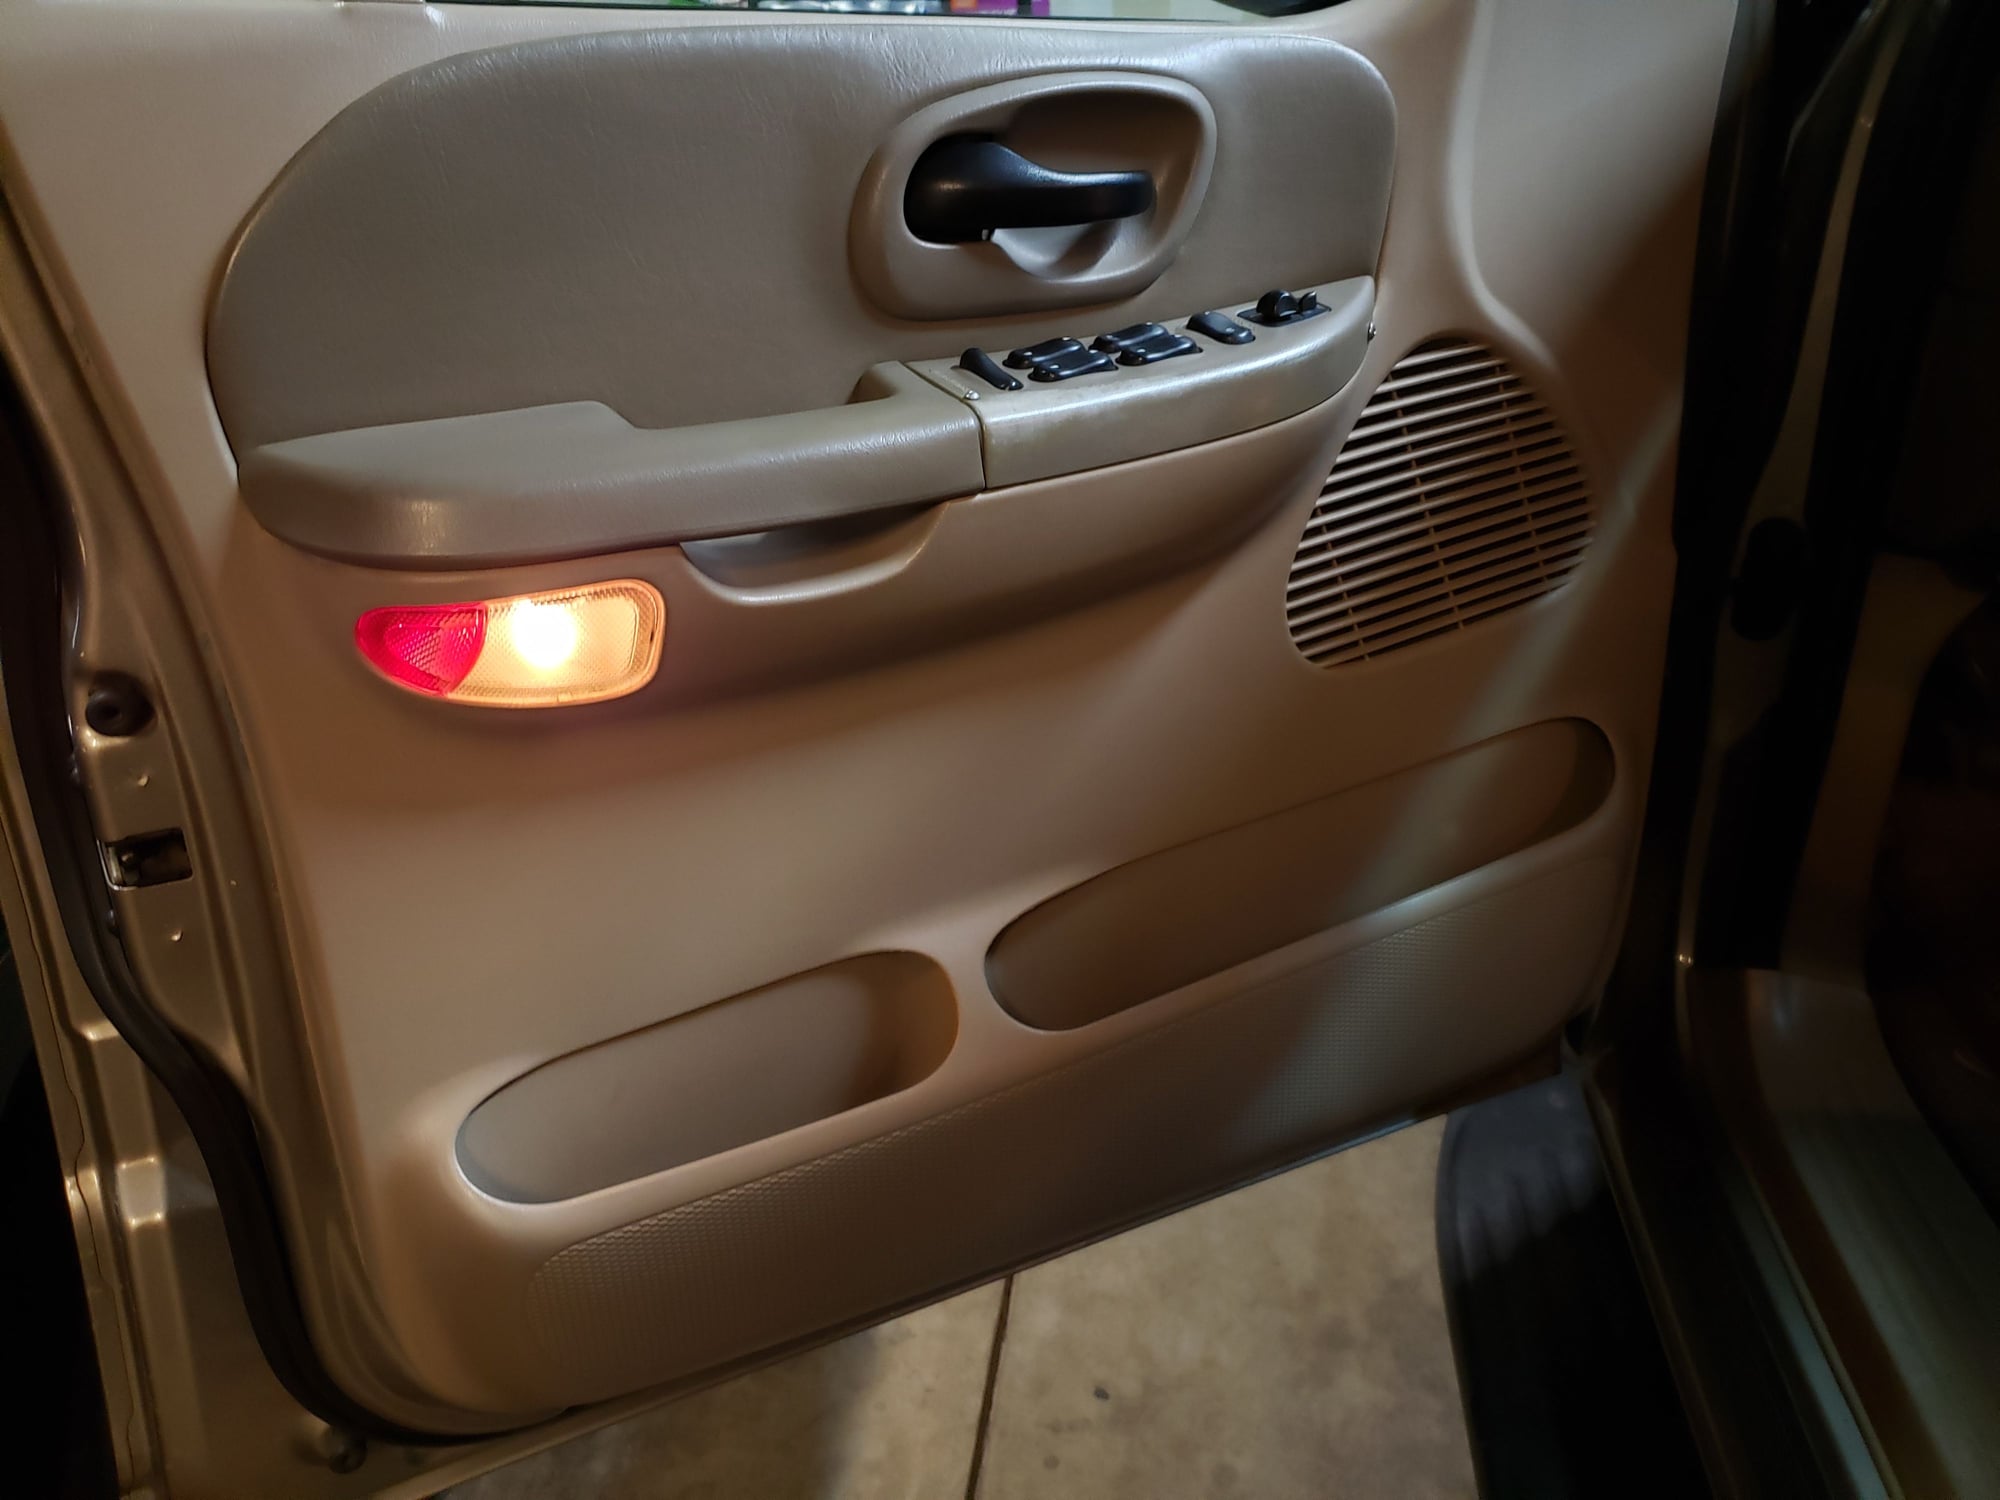 2000 F150 interior paint - Ford F150 Forum - Community of Ford Truck Fans